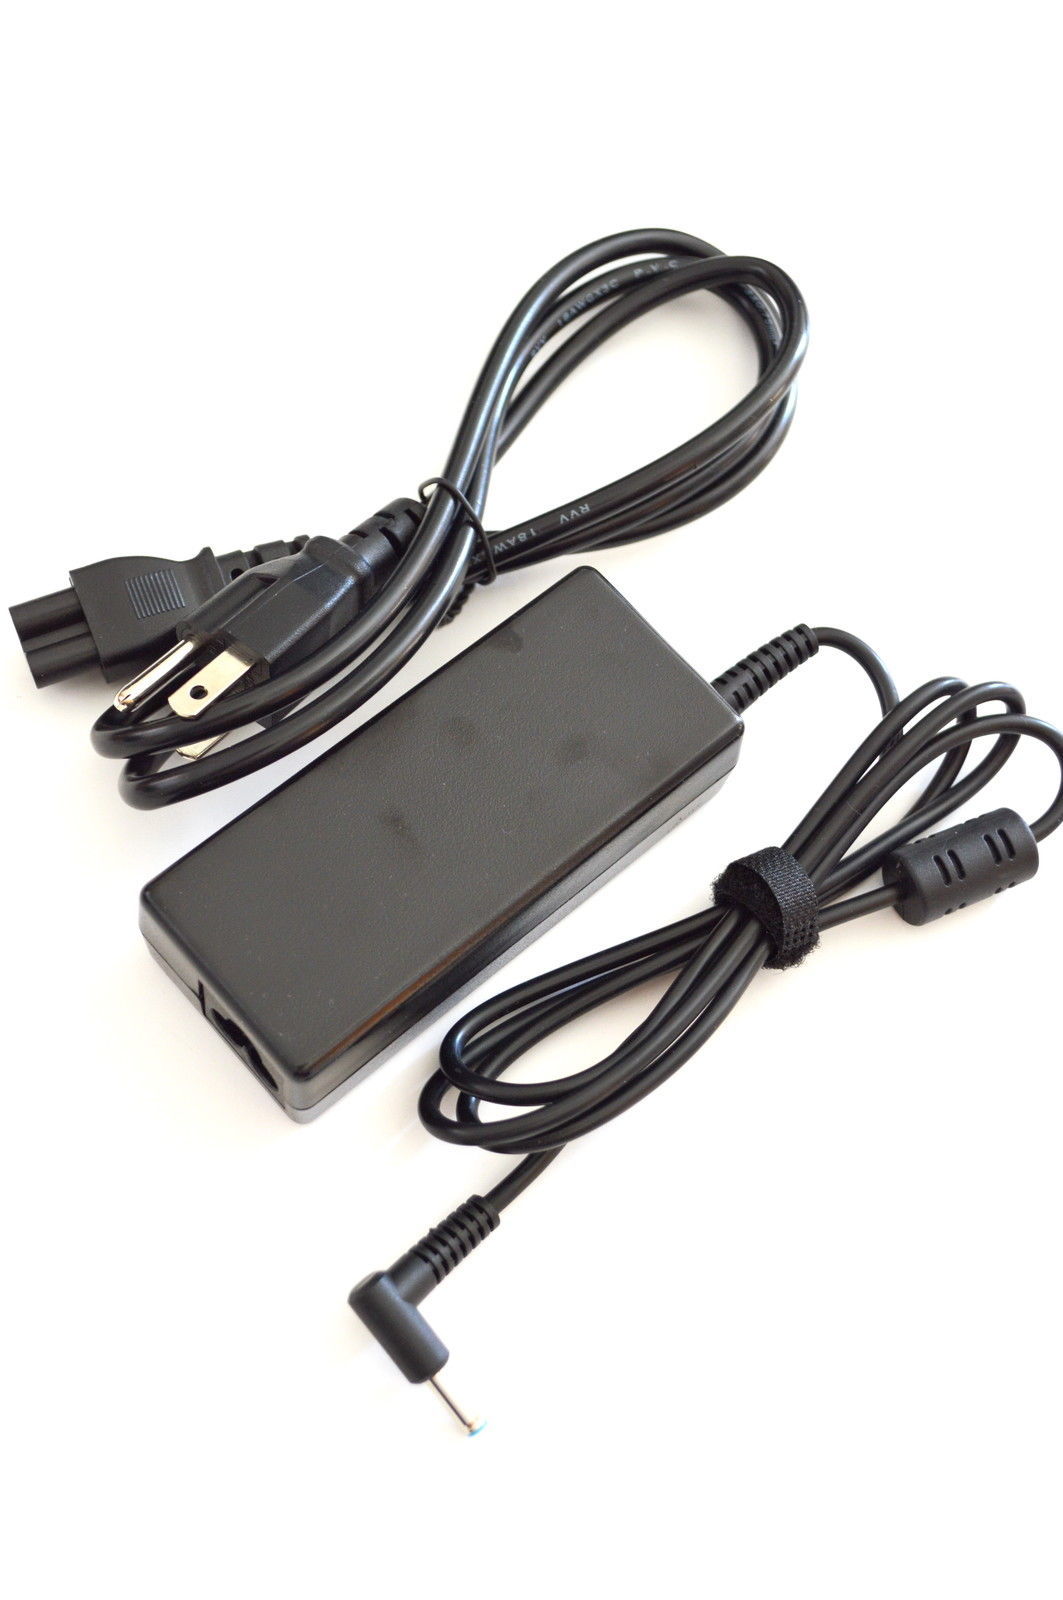 Primary image for AC Adapter Charger for HP Pavilion 17t-f000, 17z-f000, 15-N040US, E8B05UA Laptop